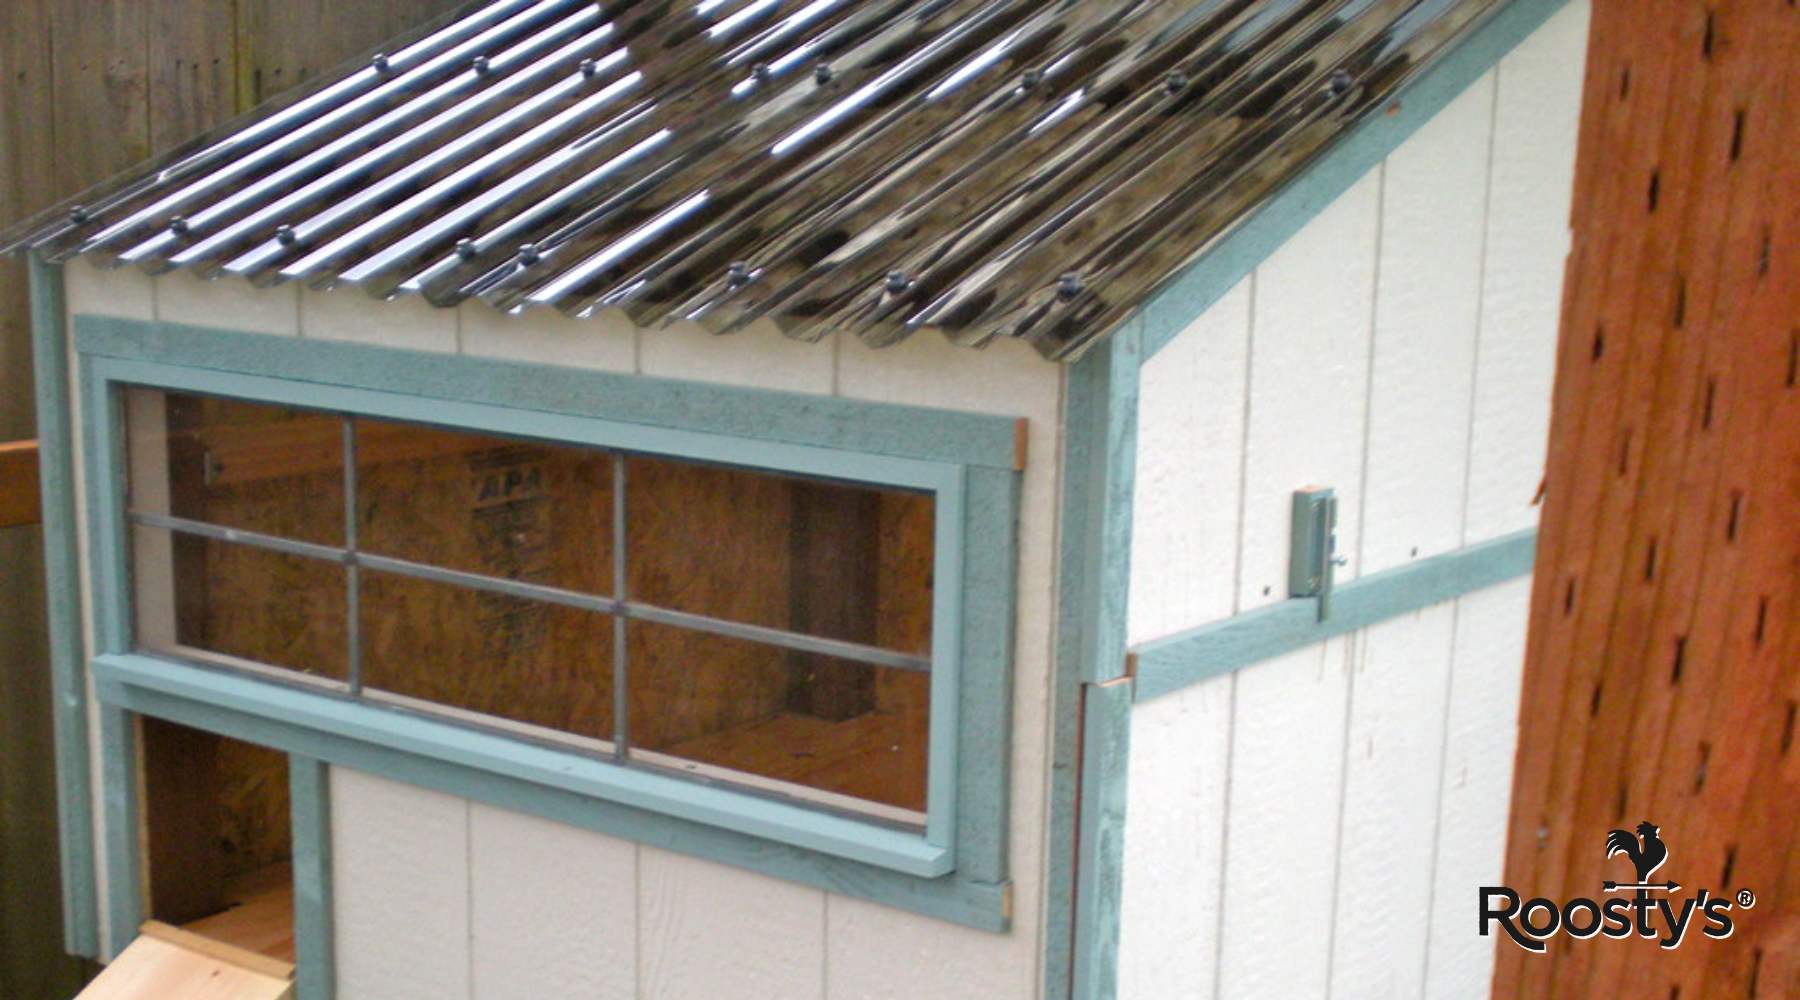 Advantages of Metal Roofing for Chicken Coops